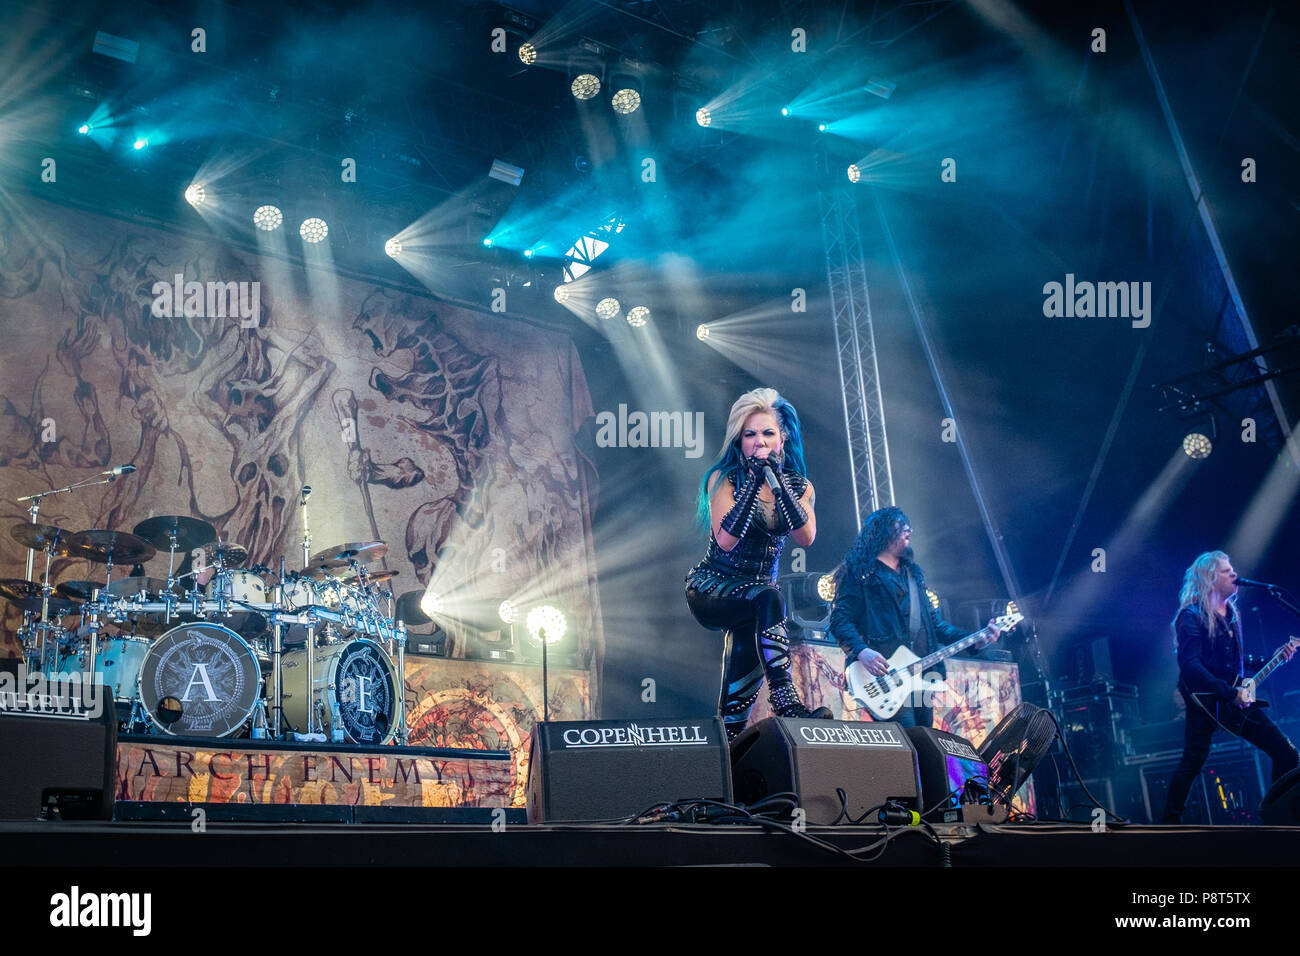 Swedish metal band 'Arch Enemy' on stage at the 2018 Copenhell metal festival in Copenhagen, Denmark. In the front vocalist Alissa White-Gluz. Stock Photo